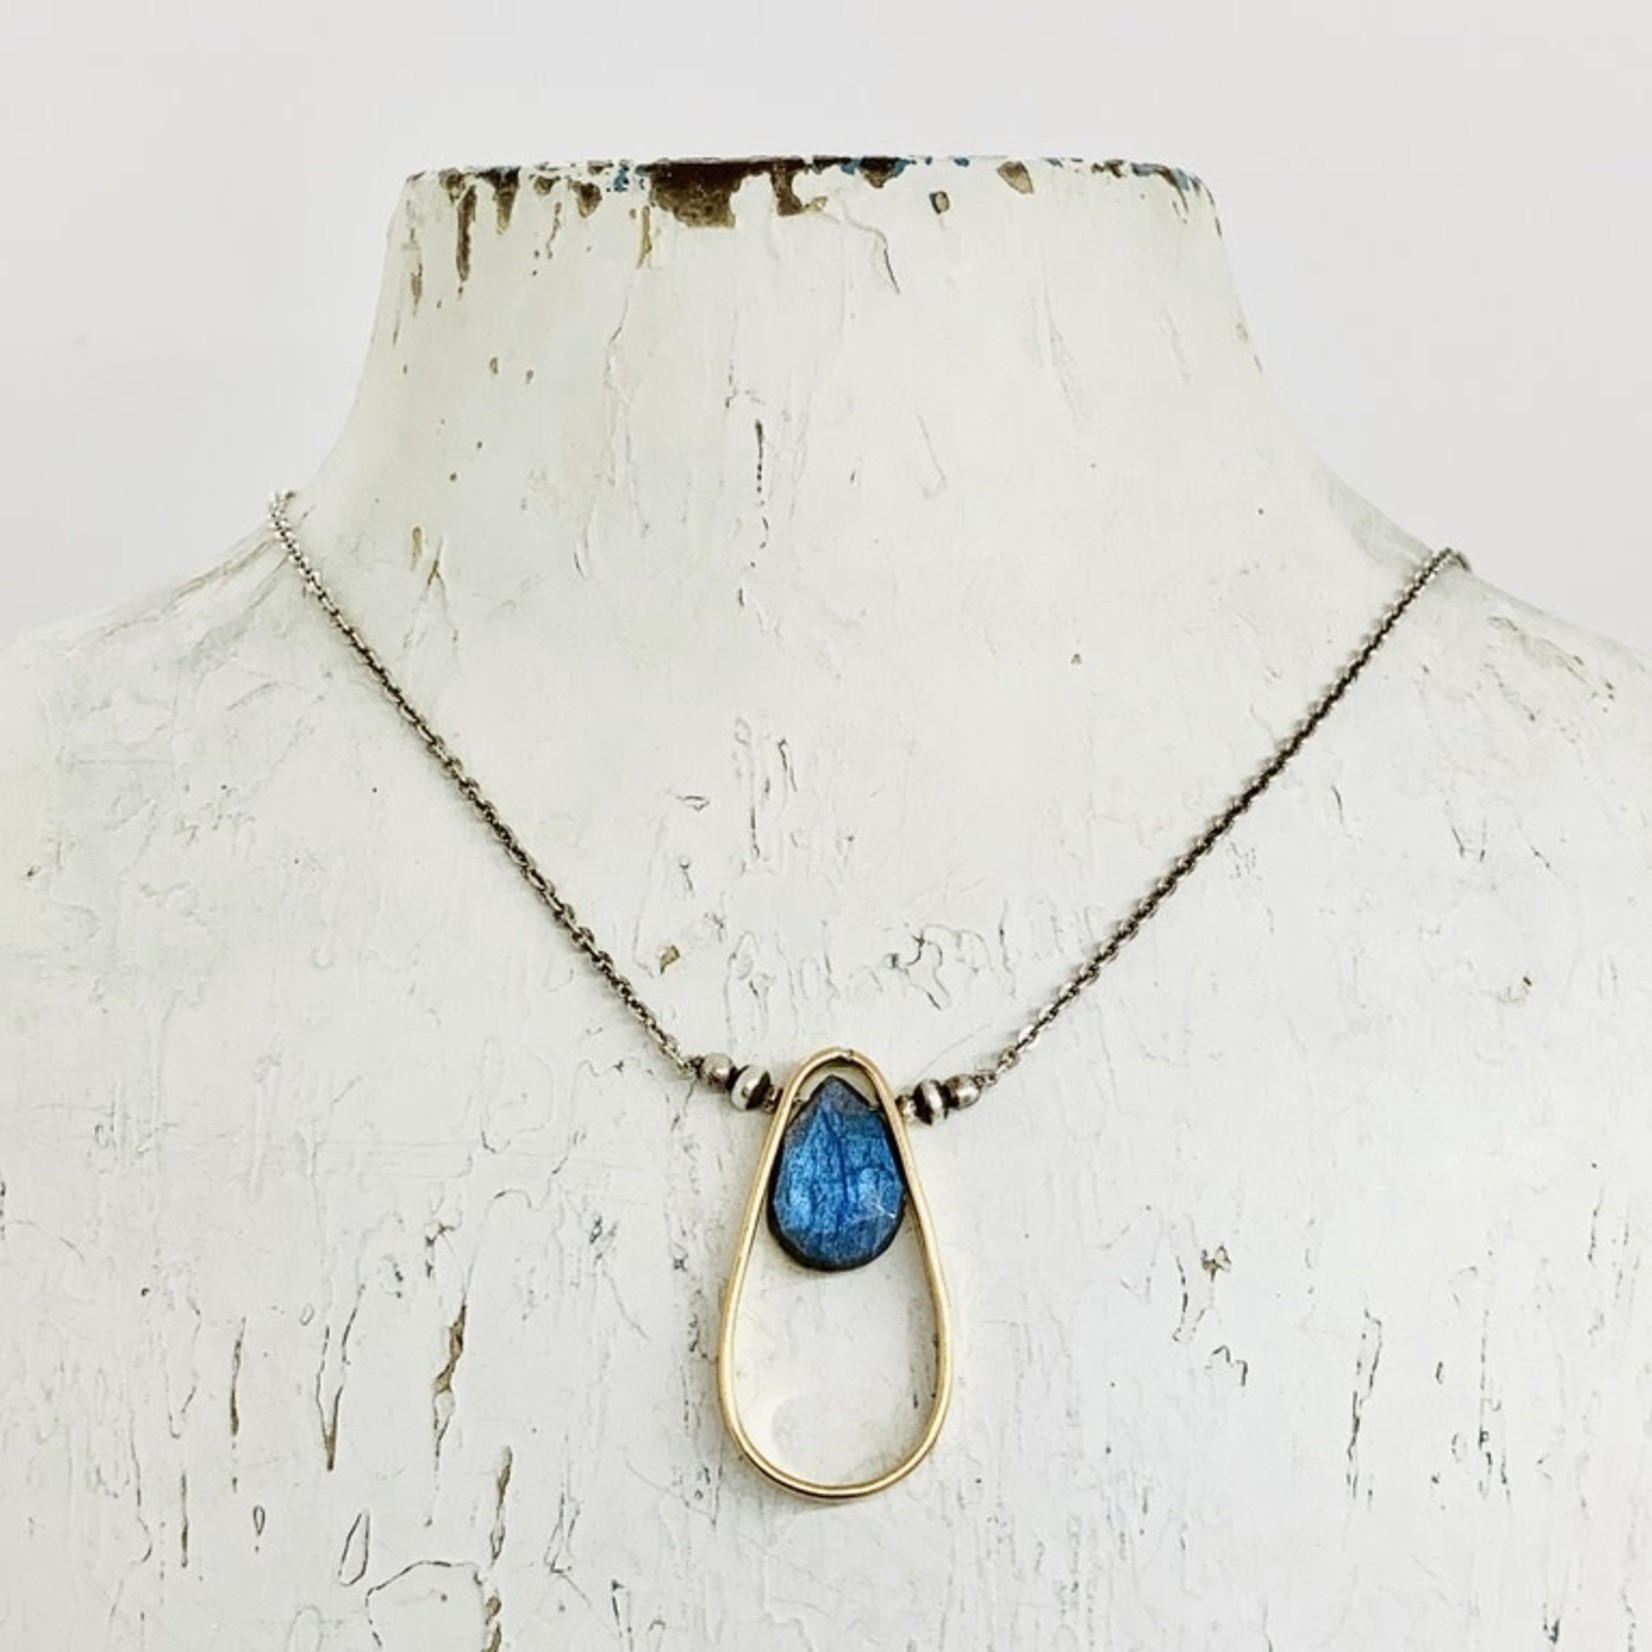 Handmade Faceted 12mm Labradorite pear in a 14k Gold filled Teardrop Pendant on Oxidized Sterling Chain Necklace